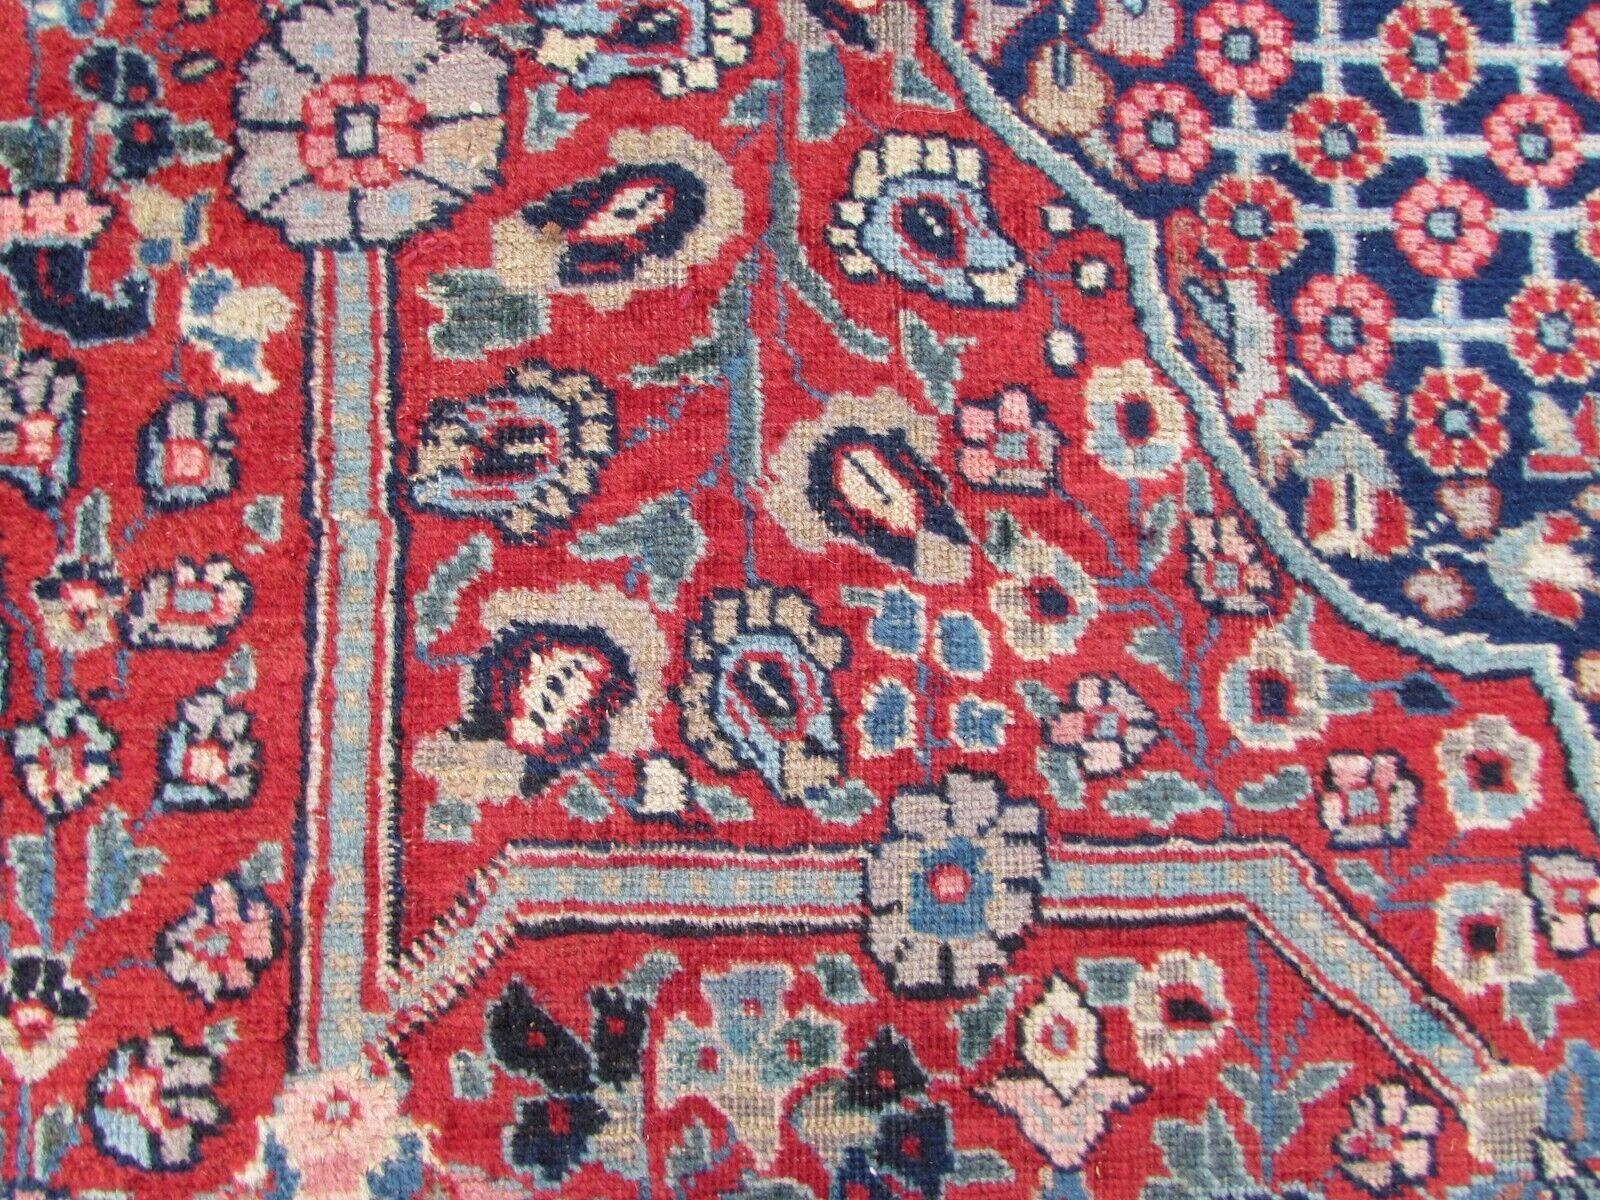 Wool Handmade Vintage Persian Style Kazvin Rug 9.3' x 12.3', 1970s - 1Q68 For Sale